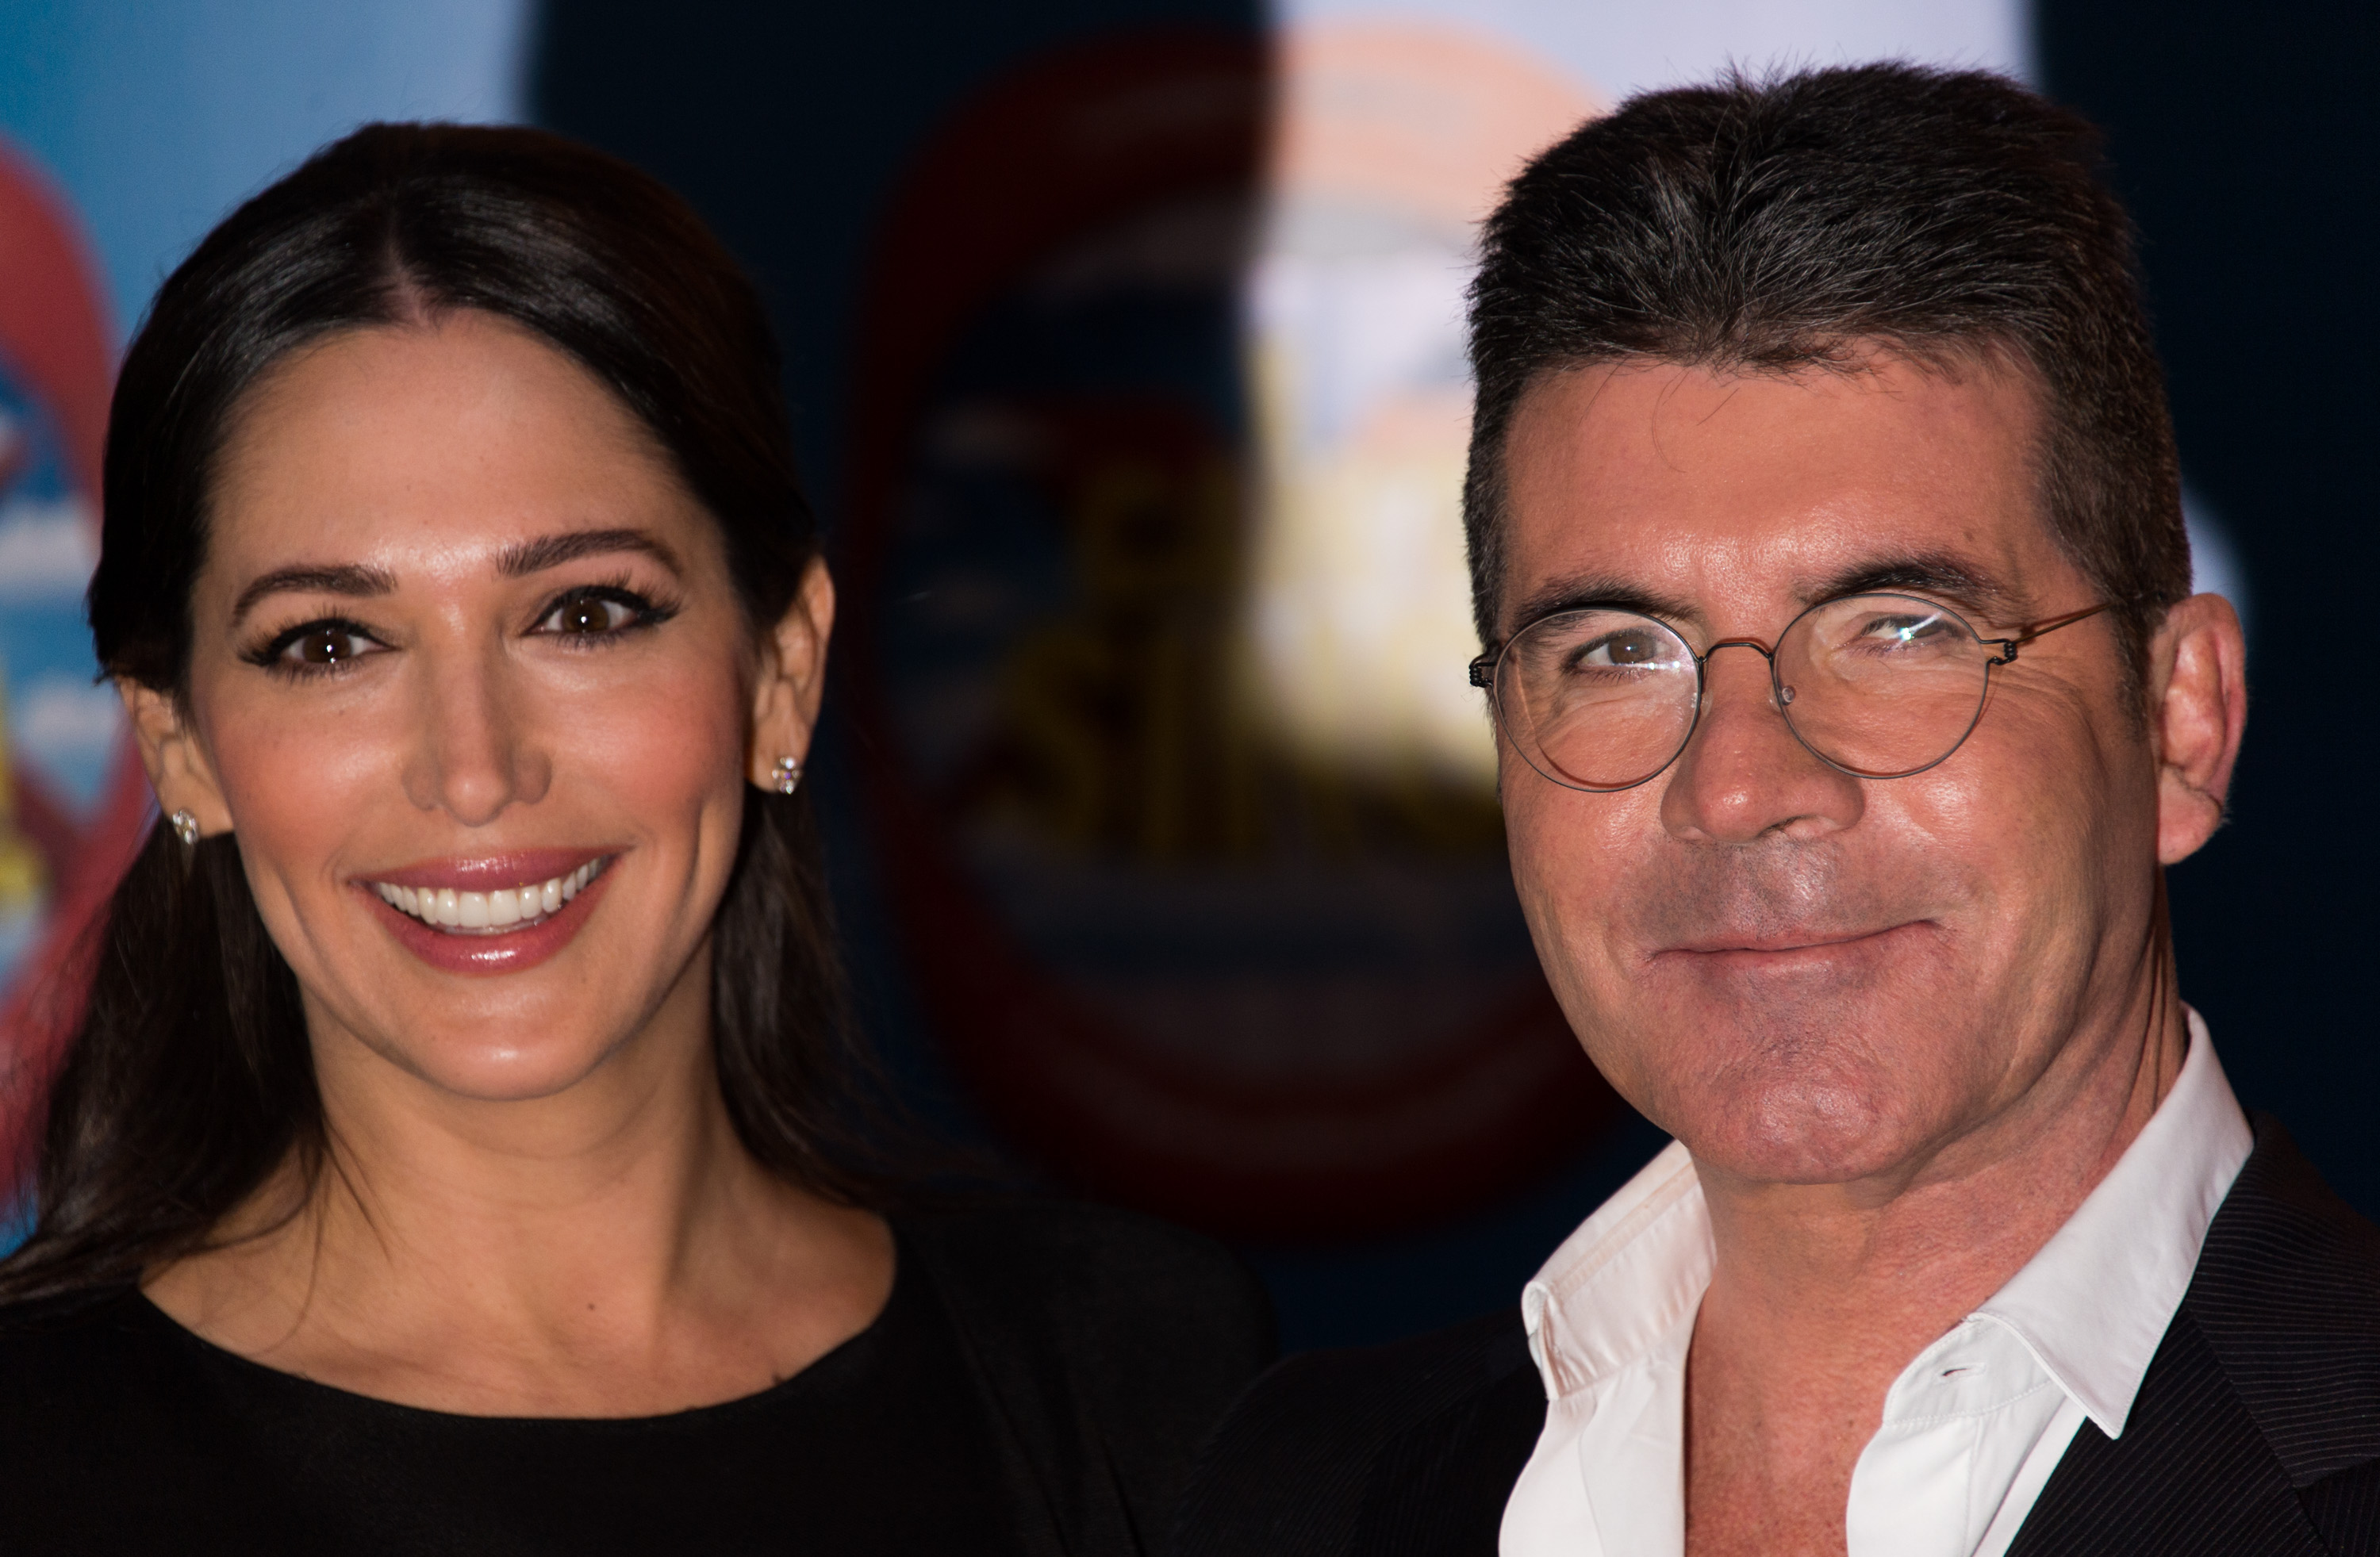 entertainment, features, news, celebrity affairs, cowell and silverman affa...